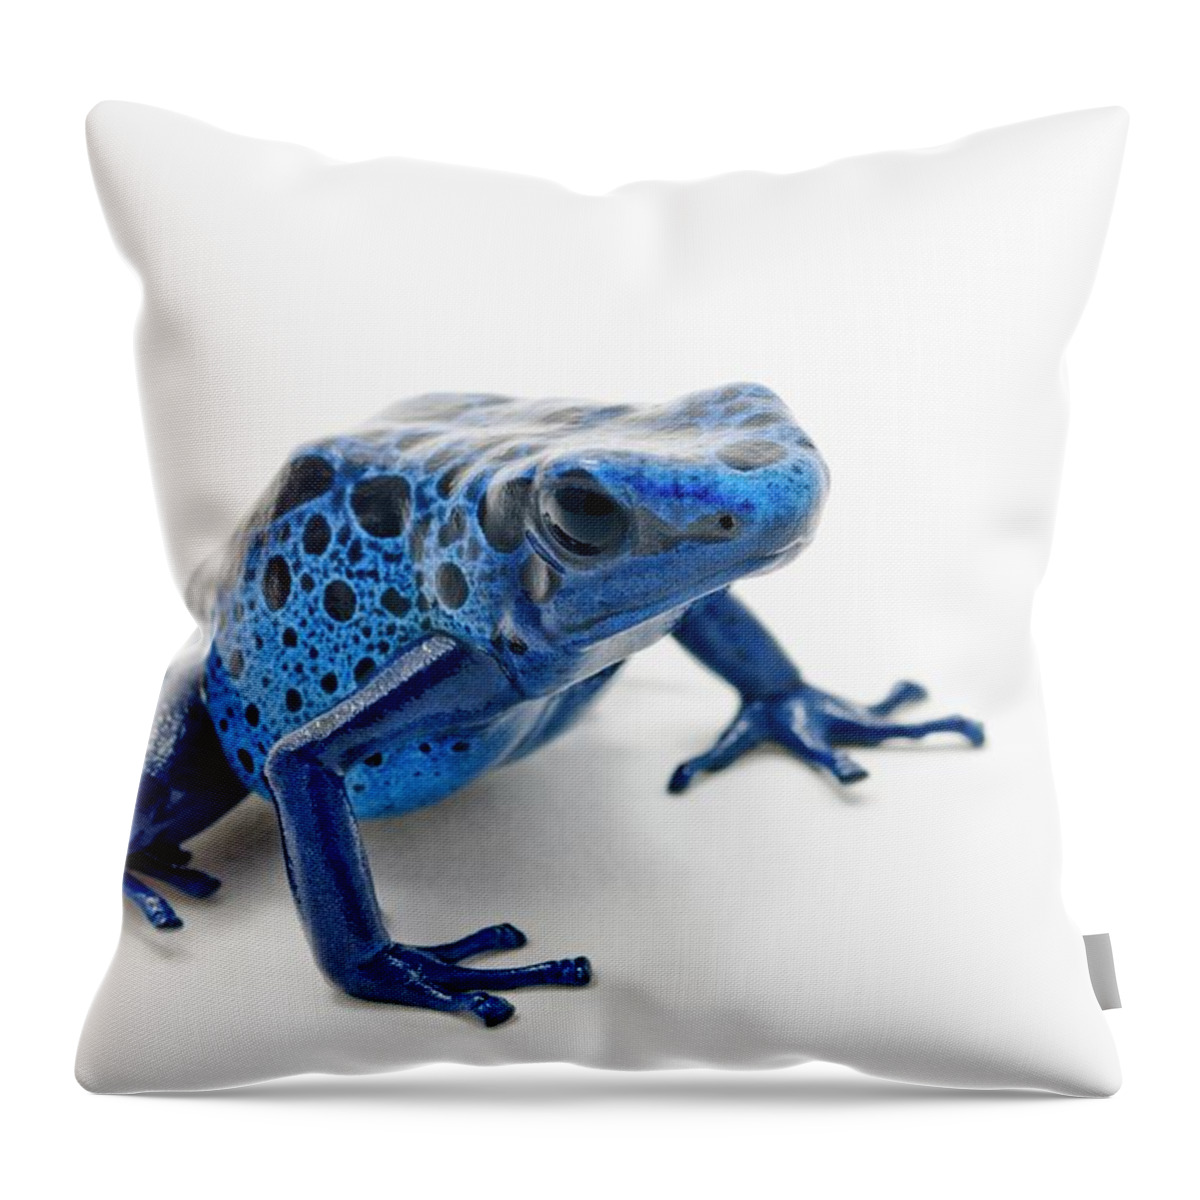 White Background Throw Pillow featuring the photograph Blue Poison Dart Frog Dendrobates #1 by Design Pics / Corey Hochachka